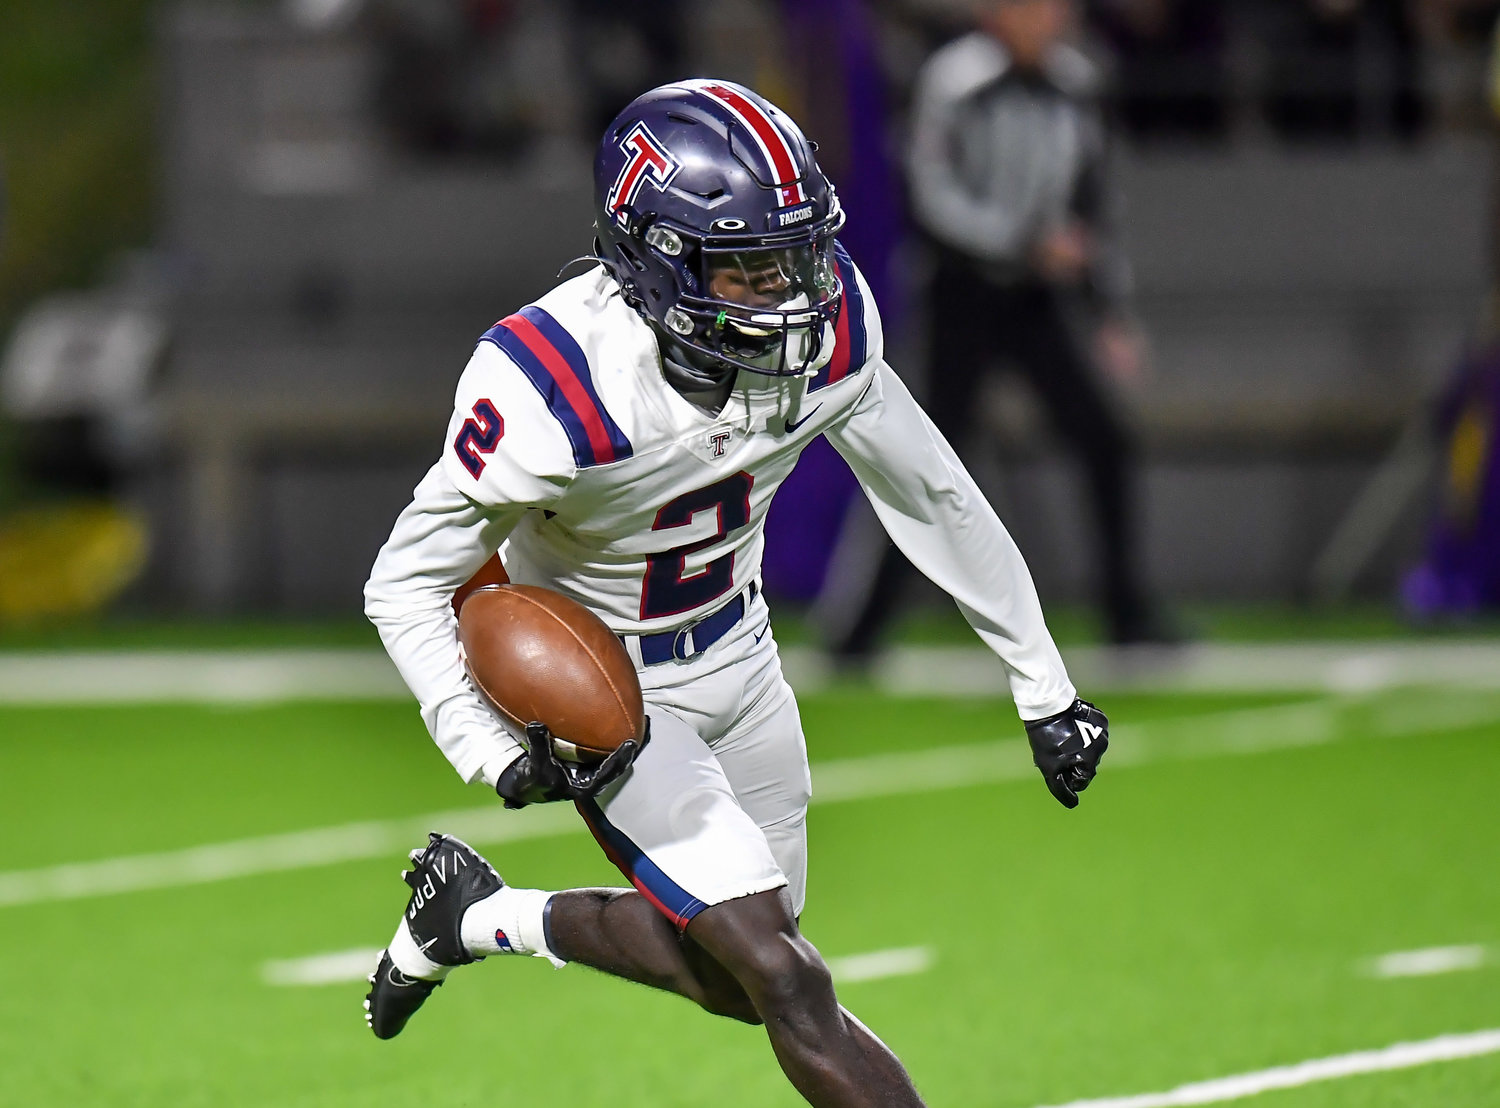 Houston Tx. Nov 19, 2021: Tompkins #2 Joshua Mcmillan ii carries the ball during the UIL area playoff game between Tompkins and Jersey Village at Pridgeon Stadium in Houston. (Photo by Mark Goodman / Katy Times)